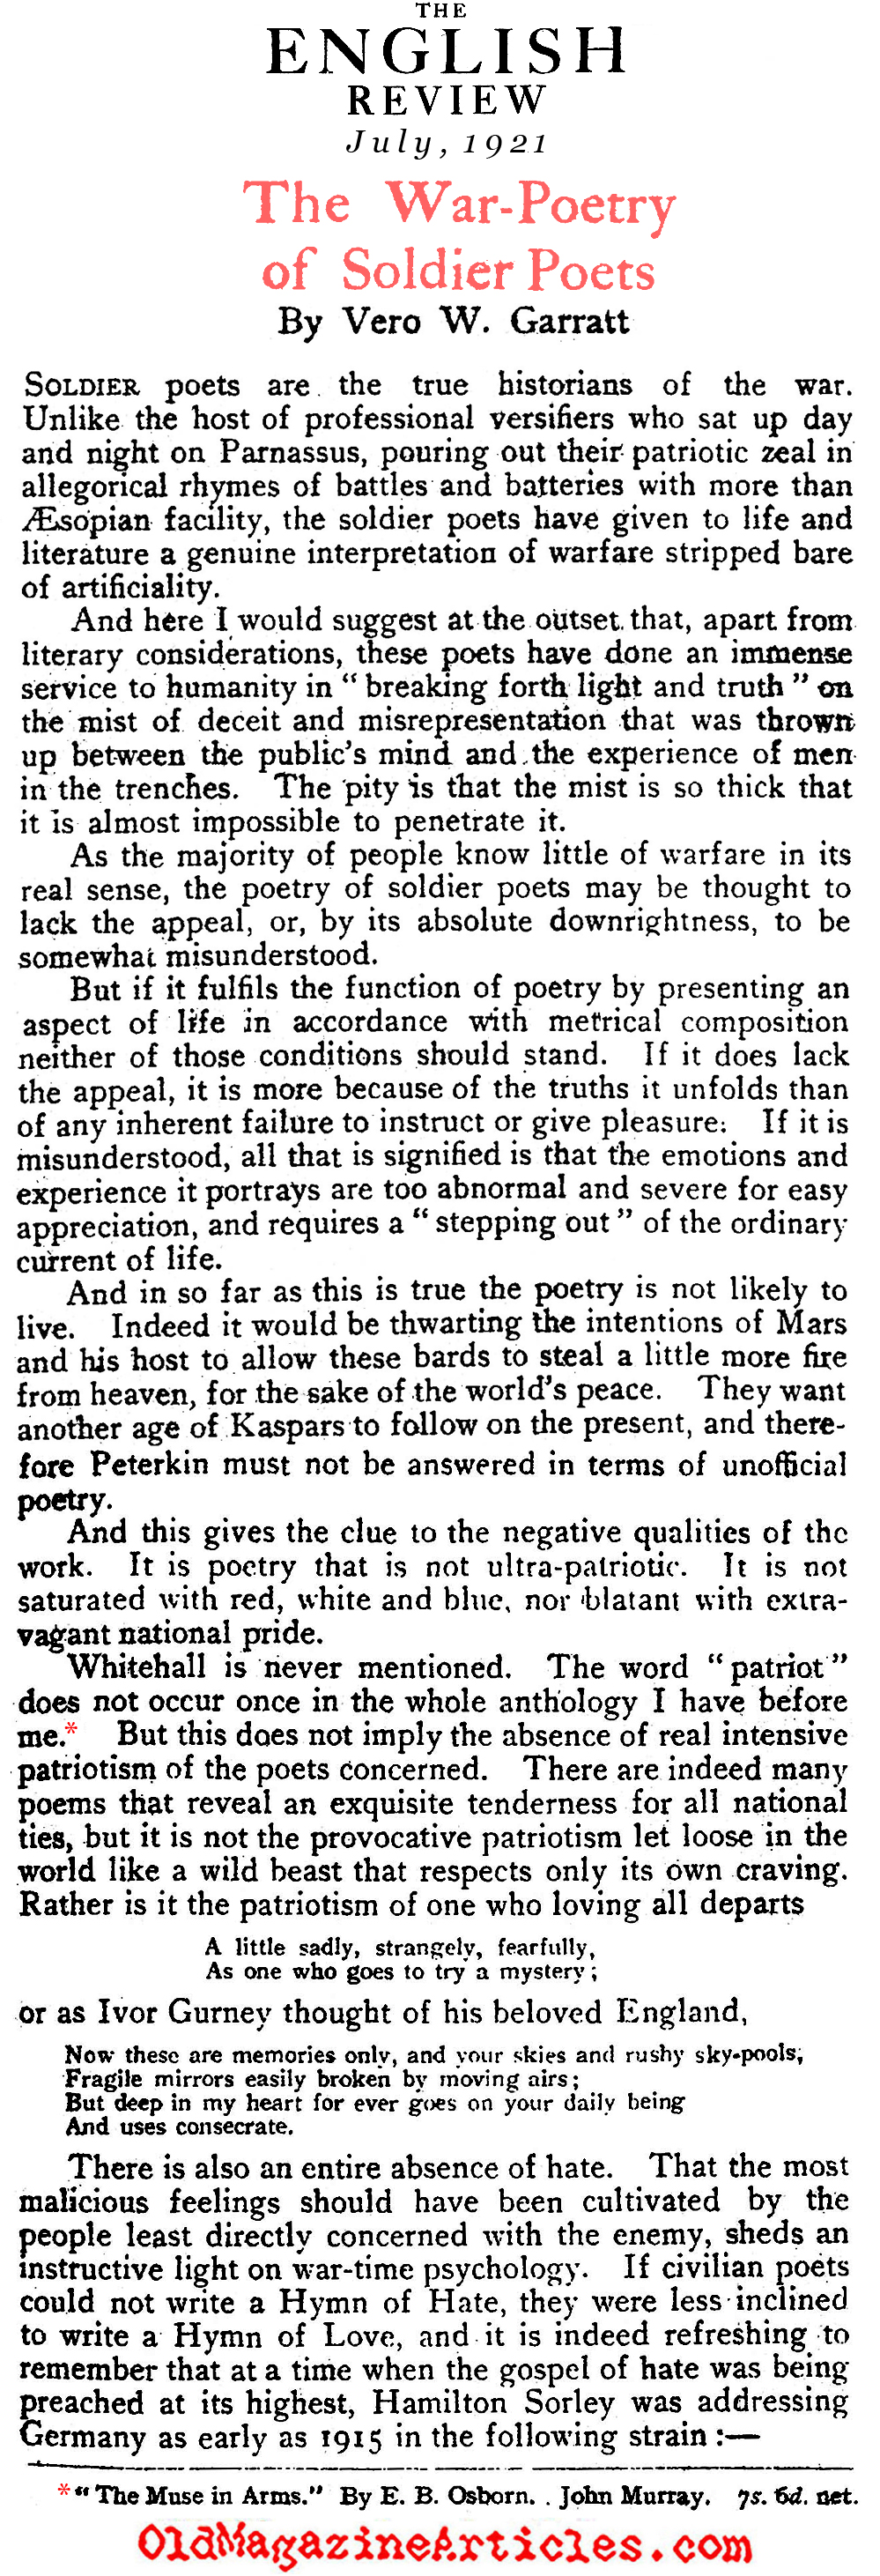 The War-Poetry of the Soldier-Poets (The English Review, 1921)